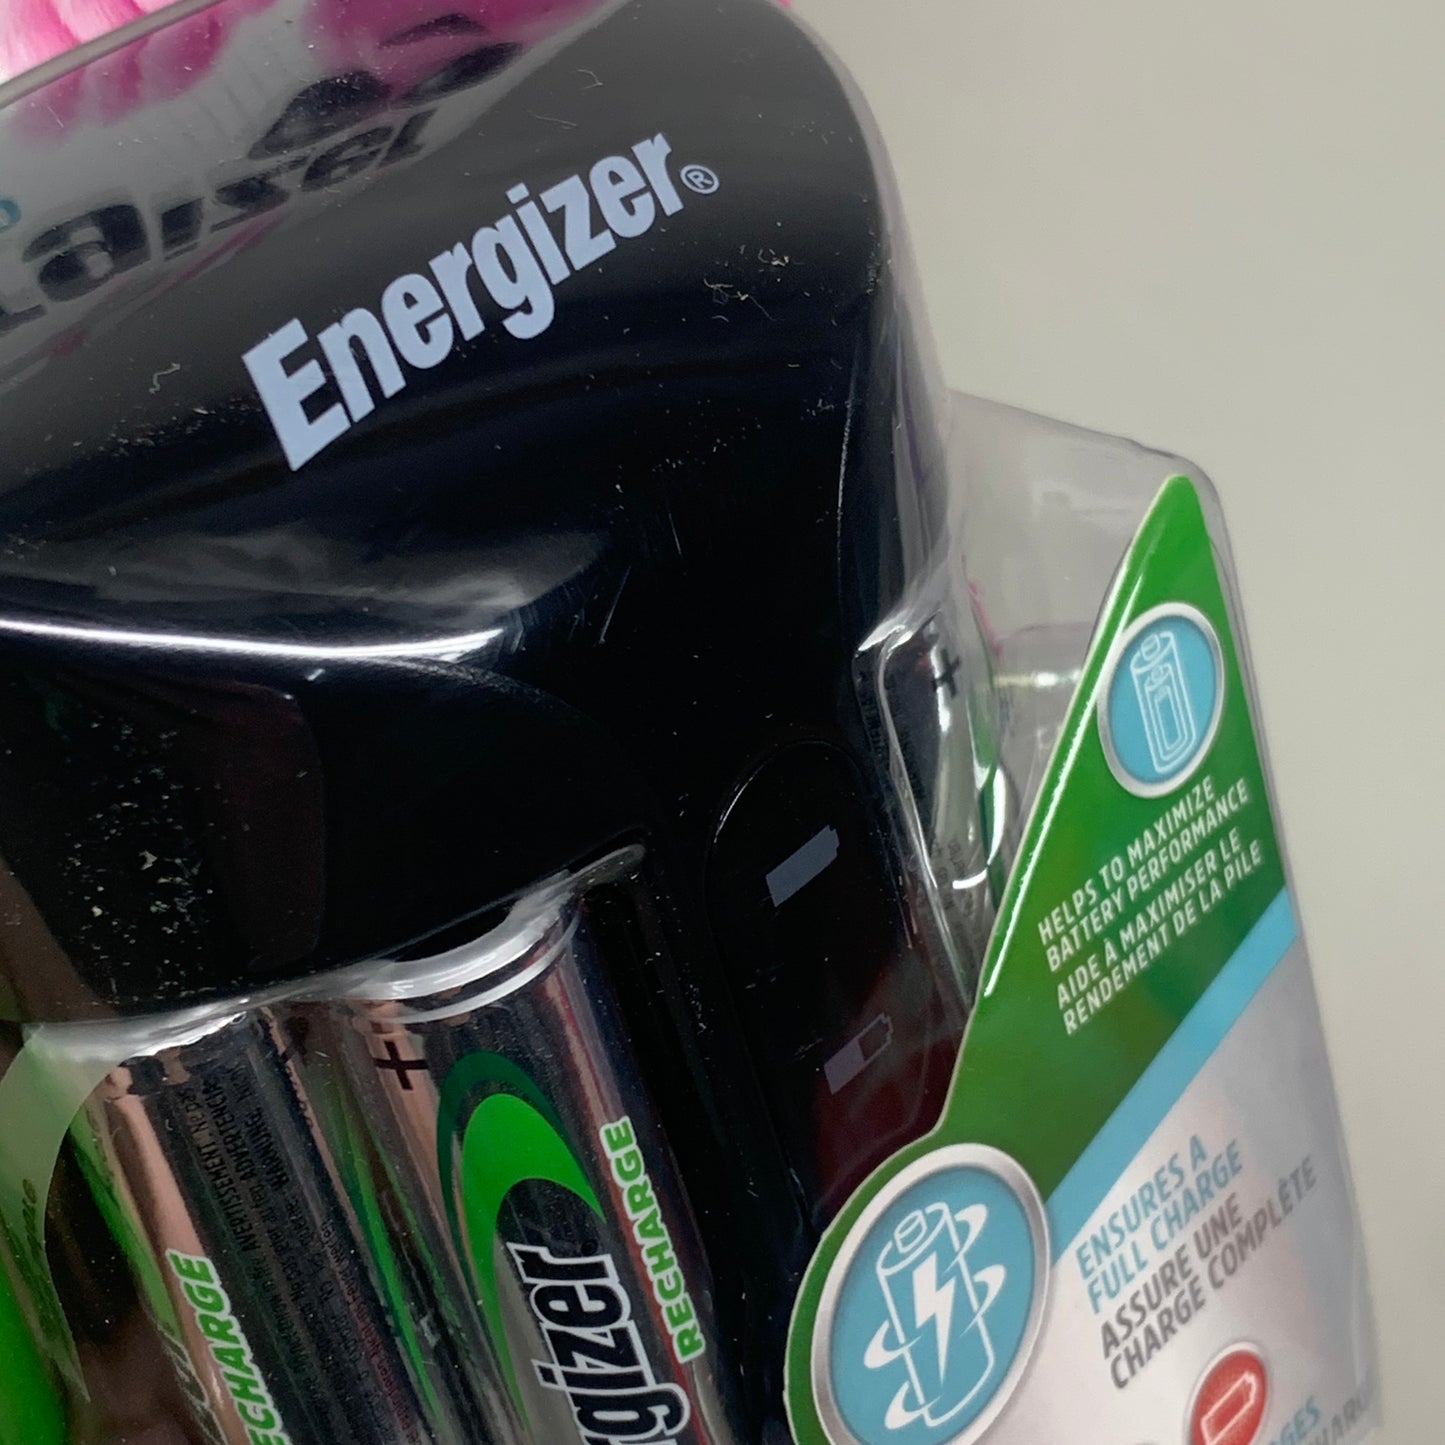 ENERGIZER Rechargeable Battery Charger Pro With 4 Imh Batteries CHPROWB4